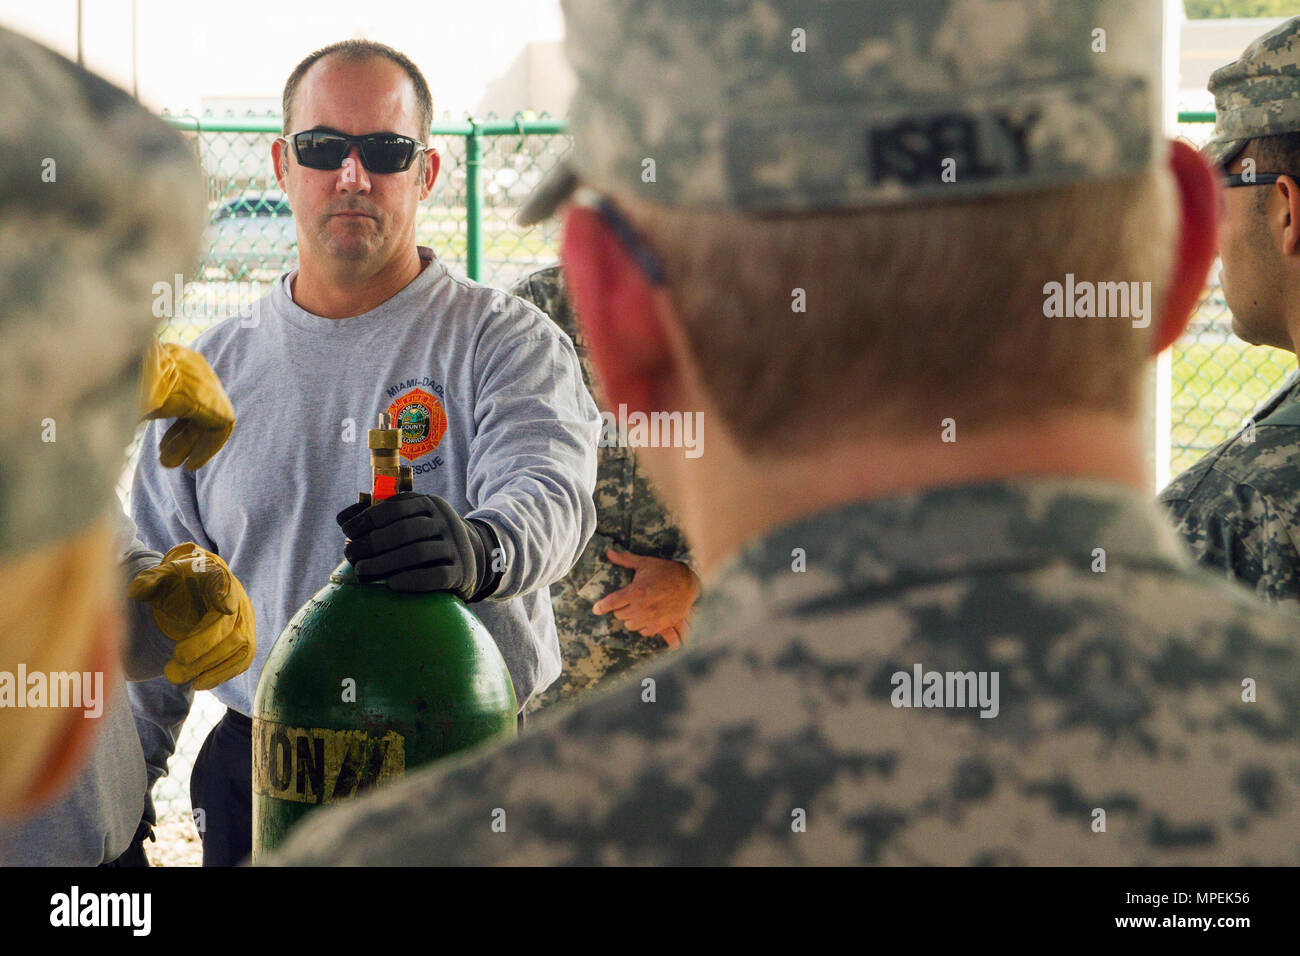 Firefighter David Guerra, a flight medic with the Miami-Dade Fire Rescue Department (MDFR), explains how to cap a valve leak on a gas cylinder to Army Reserve Soldiers assigned to the 329th Chemical, Biological, Radiological, and Nuclear (CBRN) Company (Reconnaissance and Surveillance), during training at the MDFR training facility on Feb. 17, 2017 in Doral, Fla. The 329th CBRN Company, from Orlando, Fla., the Army Reserve’s 469th Ground Ambulance Company, from Wichita, Kan., and the Florida National Guard’s Civil Support Team, spent the day training with MDFR firefighters and learned about to Stock Photo